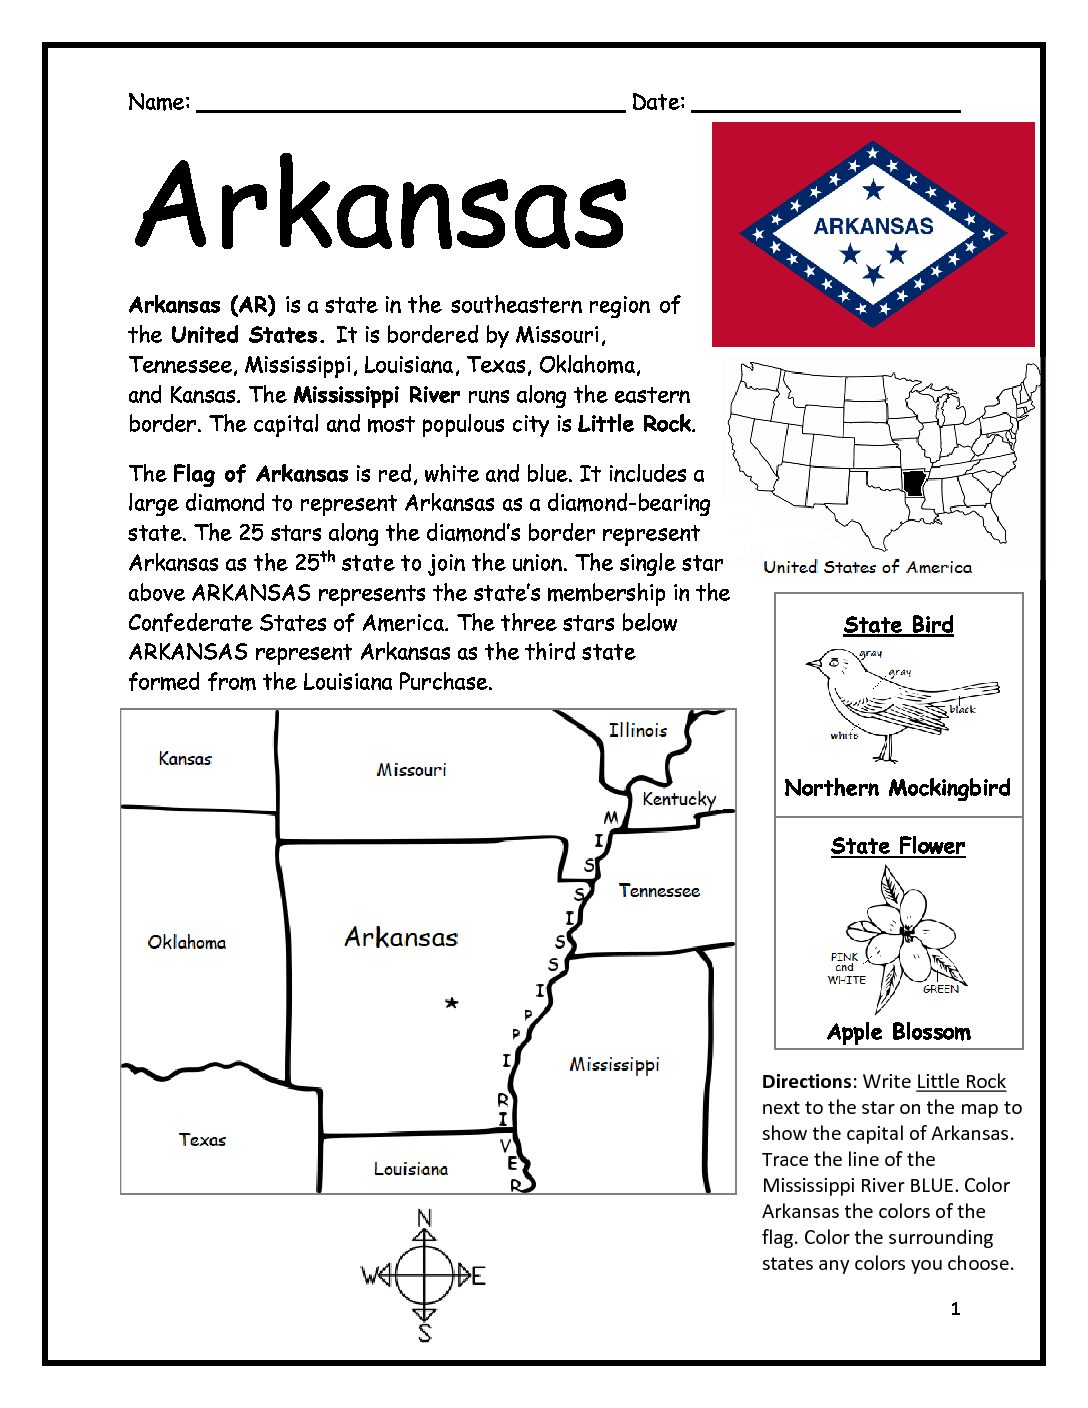 Arkansas - Introductory Geography Worksheet